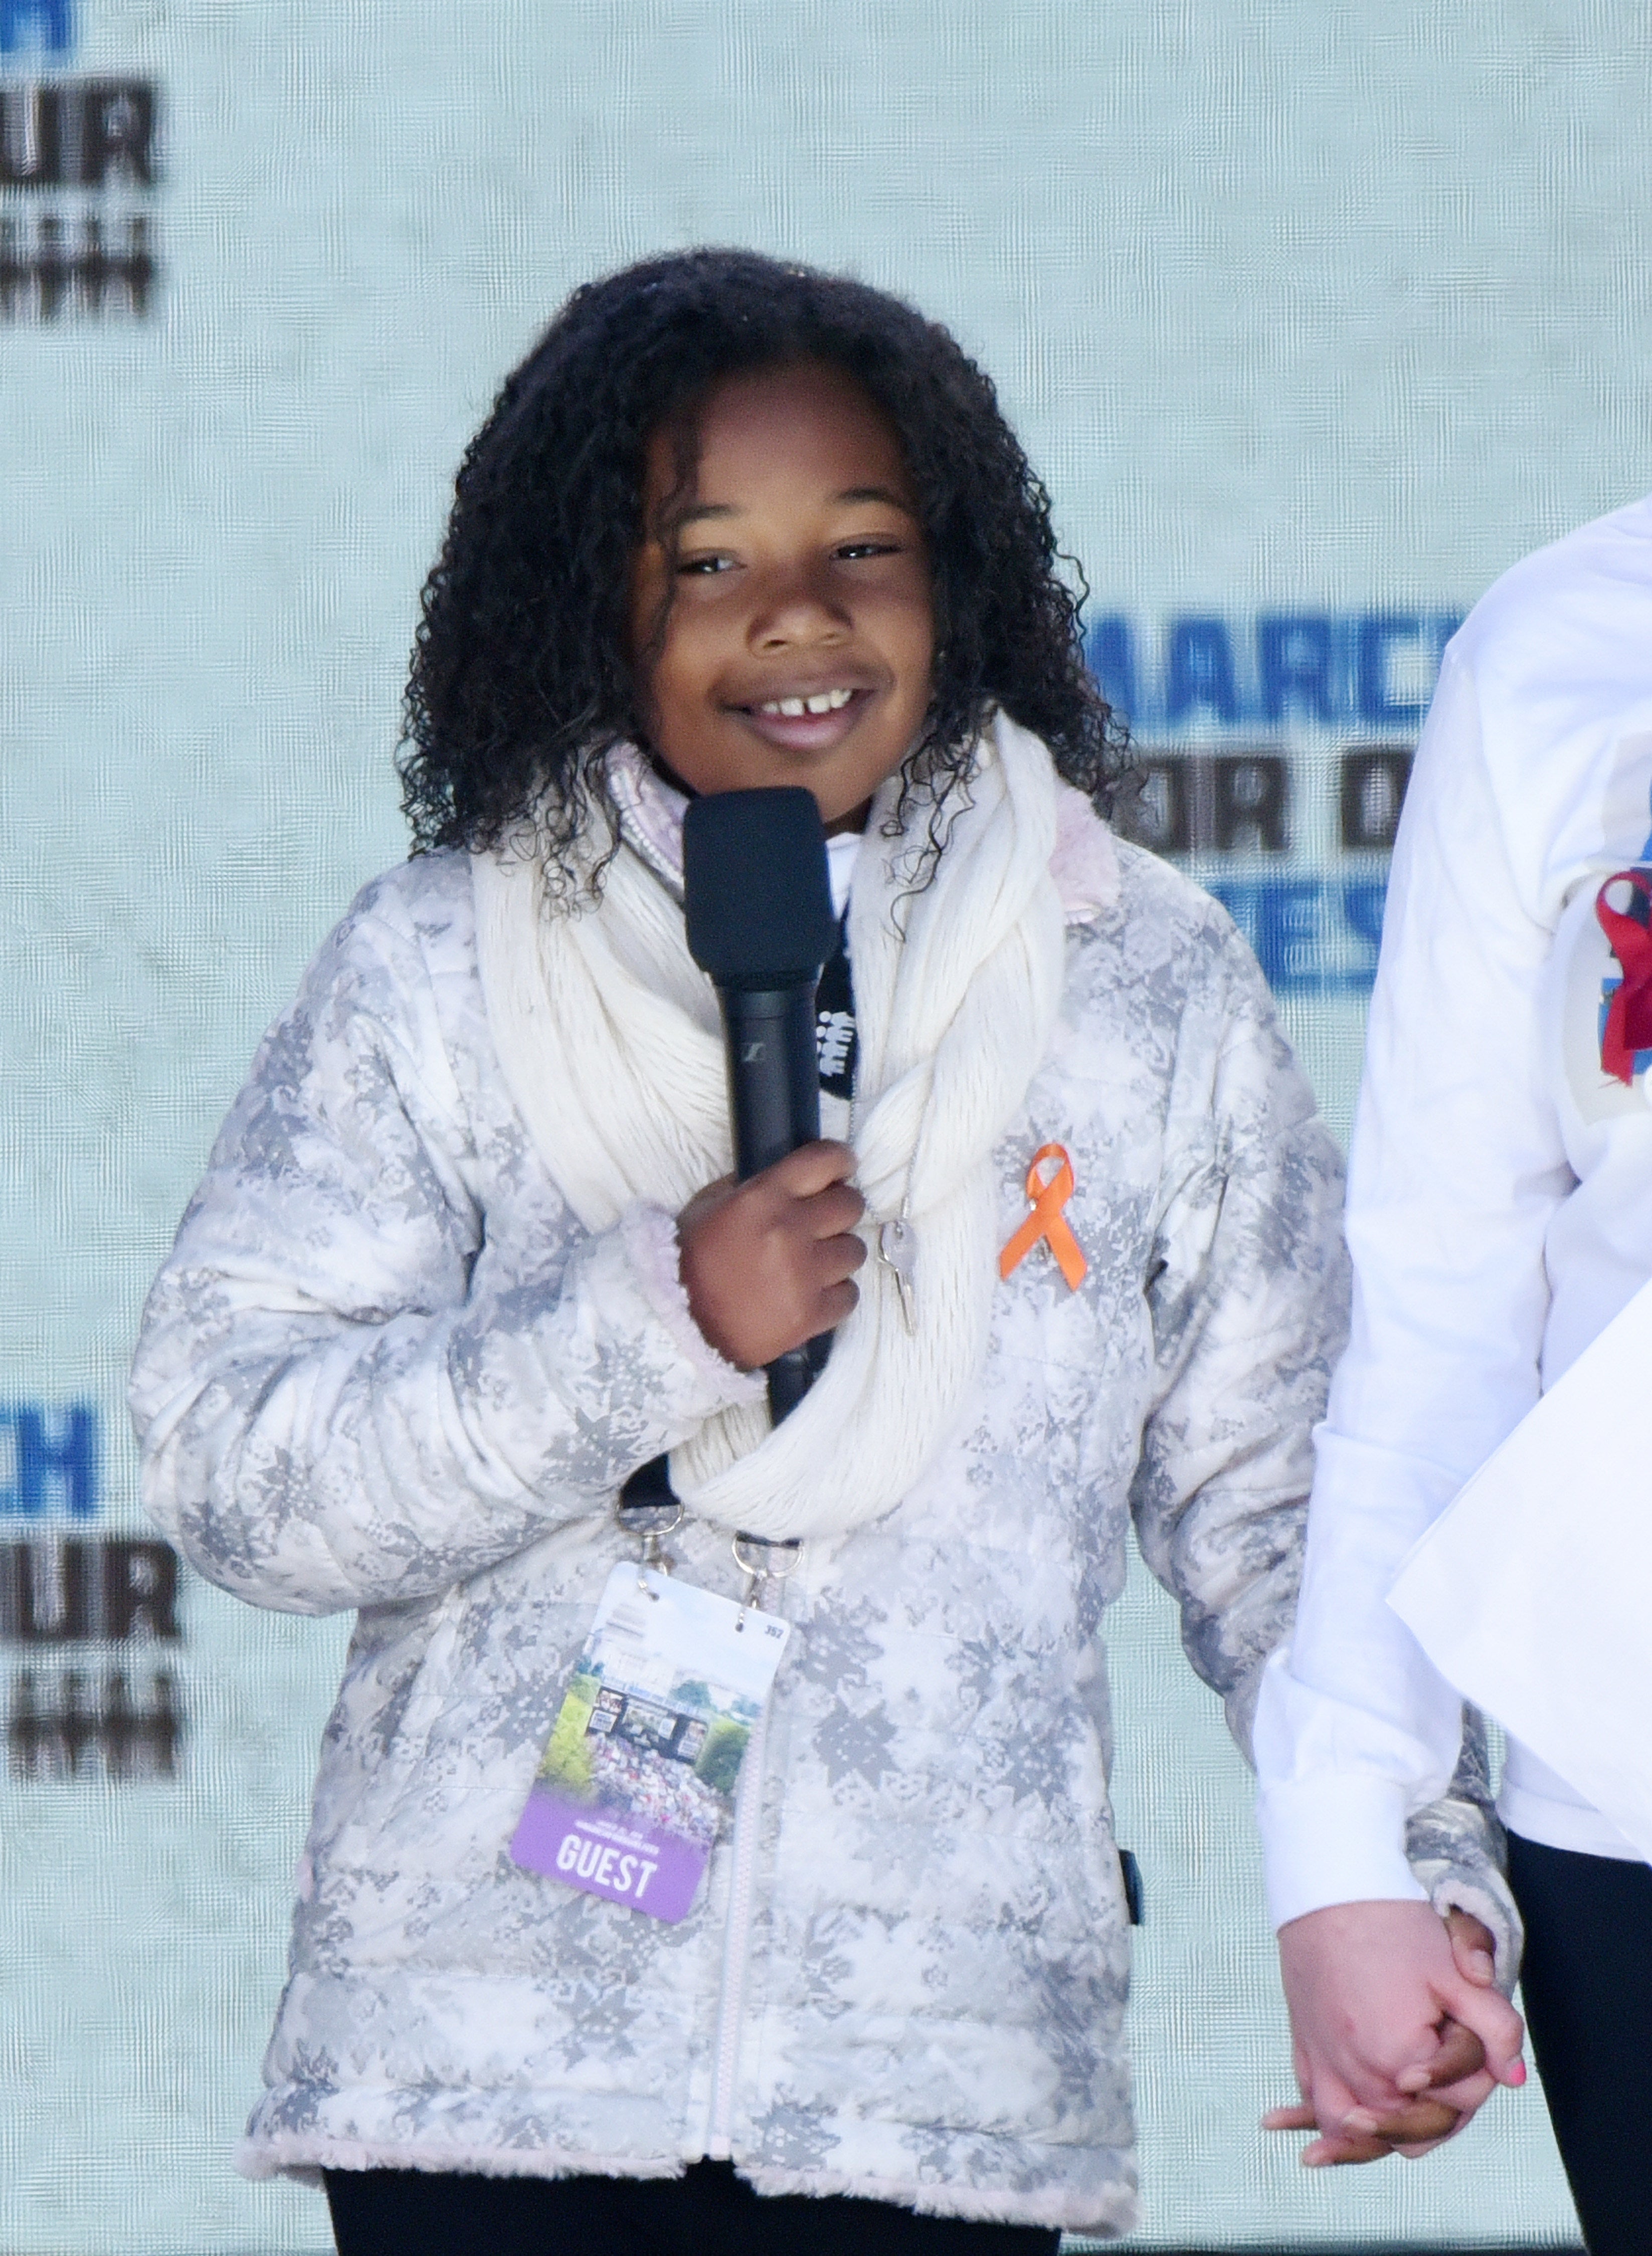 Martin Luther King Jr.'s Granddaughter Shares Her Dream Of A 'Gun Free World'
